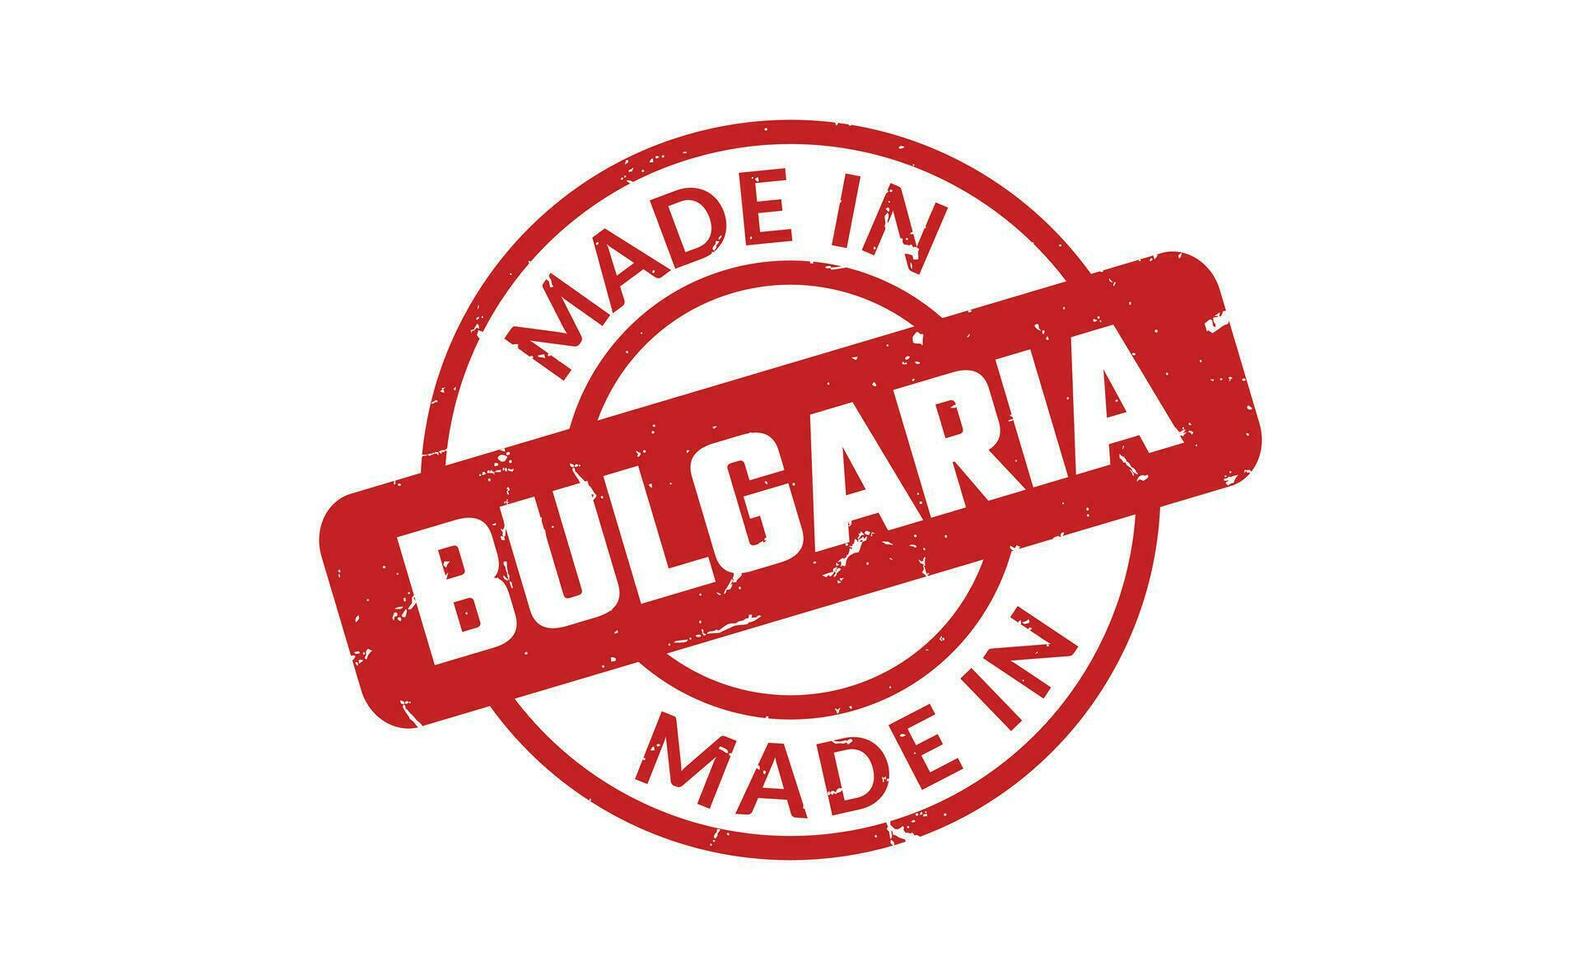 Made In Bulgaria Rubber Stamp vector